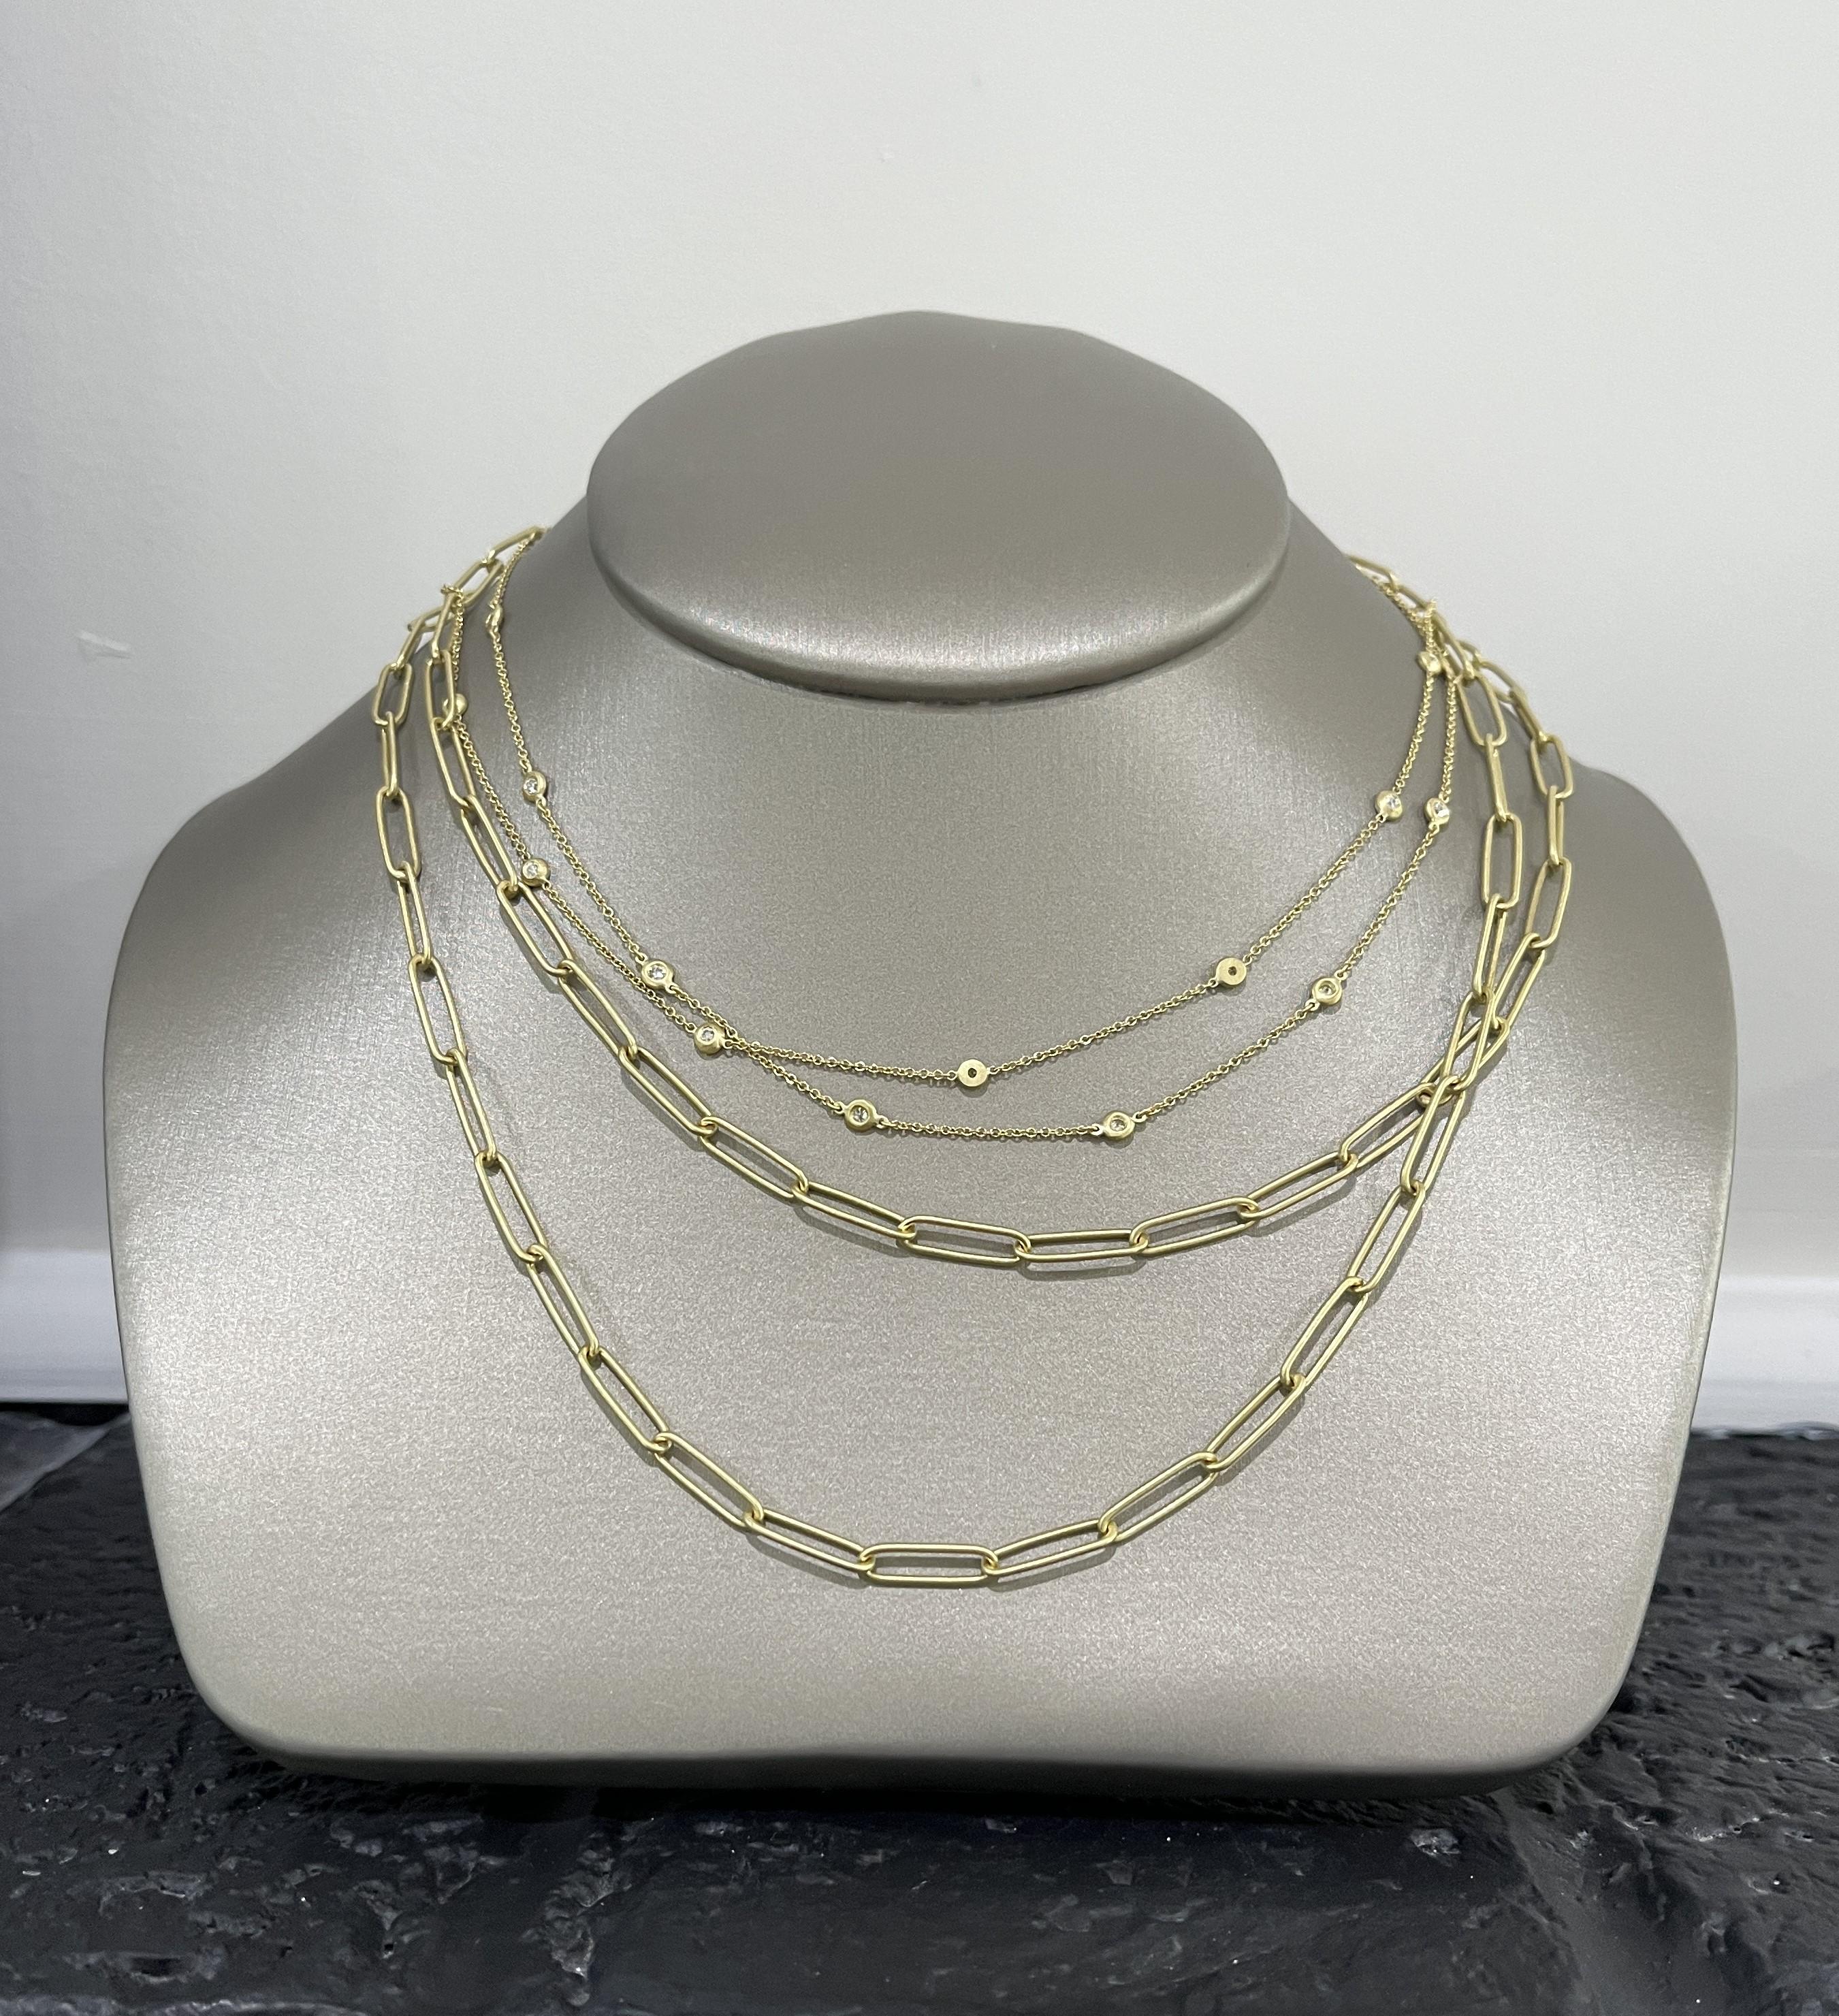 Classic and versatile, Faye's 18 Karat Gold and Diamond Station Necklace is a must  have for every jewelry wardrobe. Its bezel-set diamonds add subtle sparkle and shine to a classic style chain, which can be worn alone or as a layering piece with